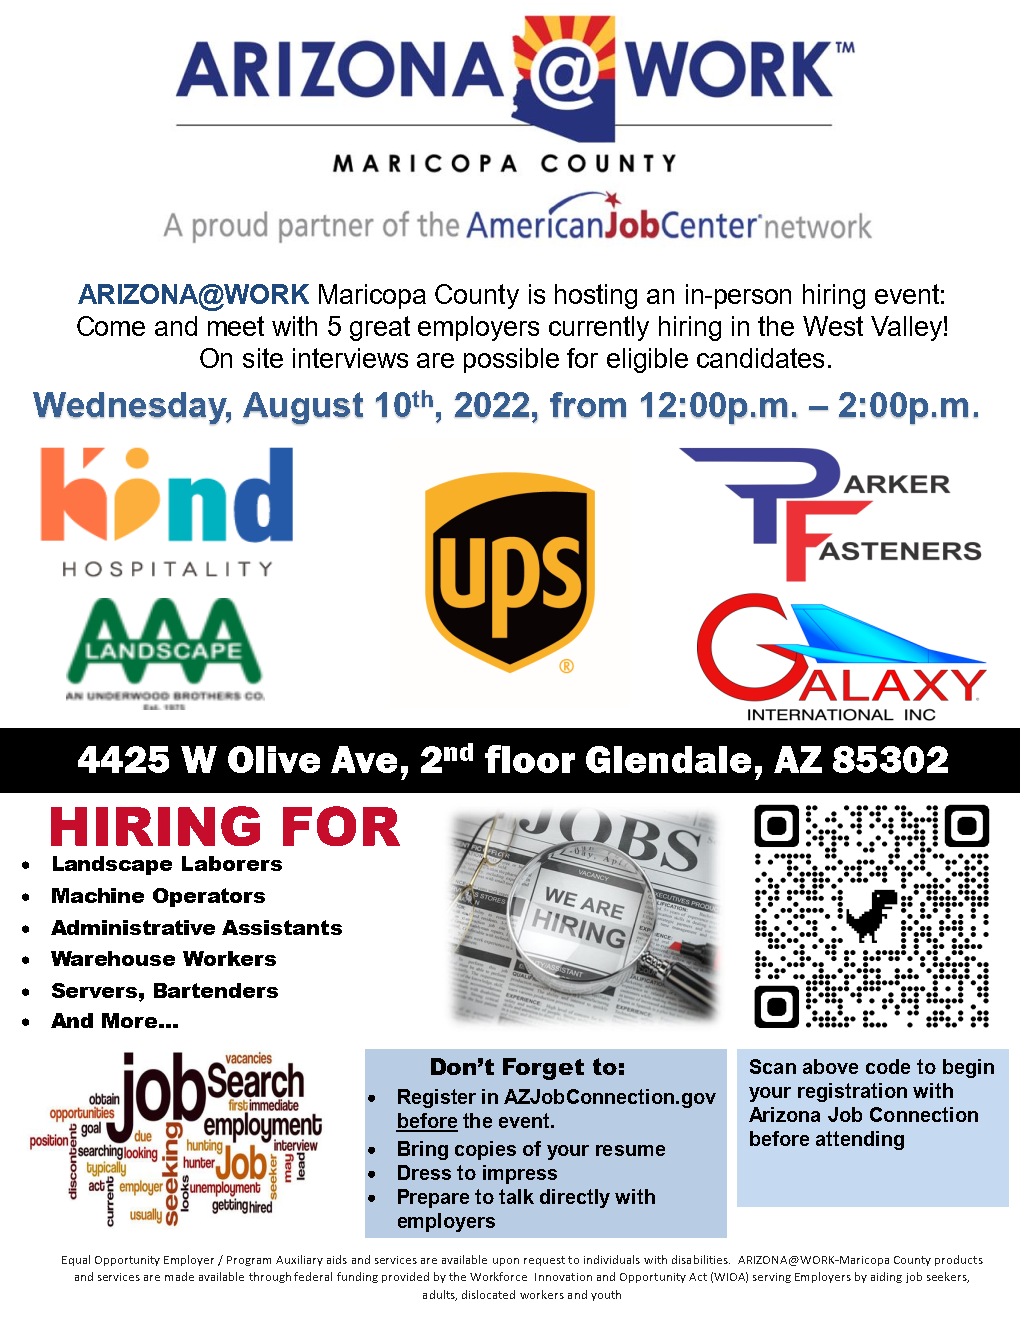 West Valley Hiring Event 08.10.2022